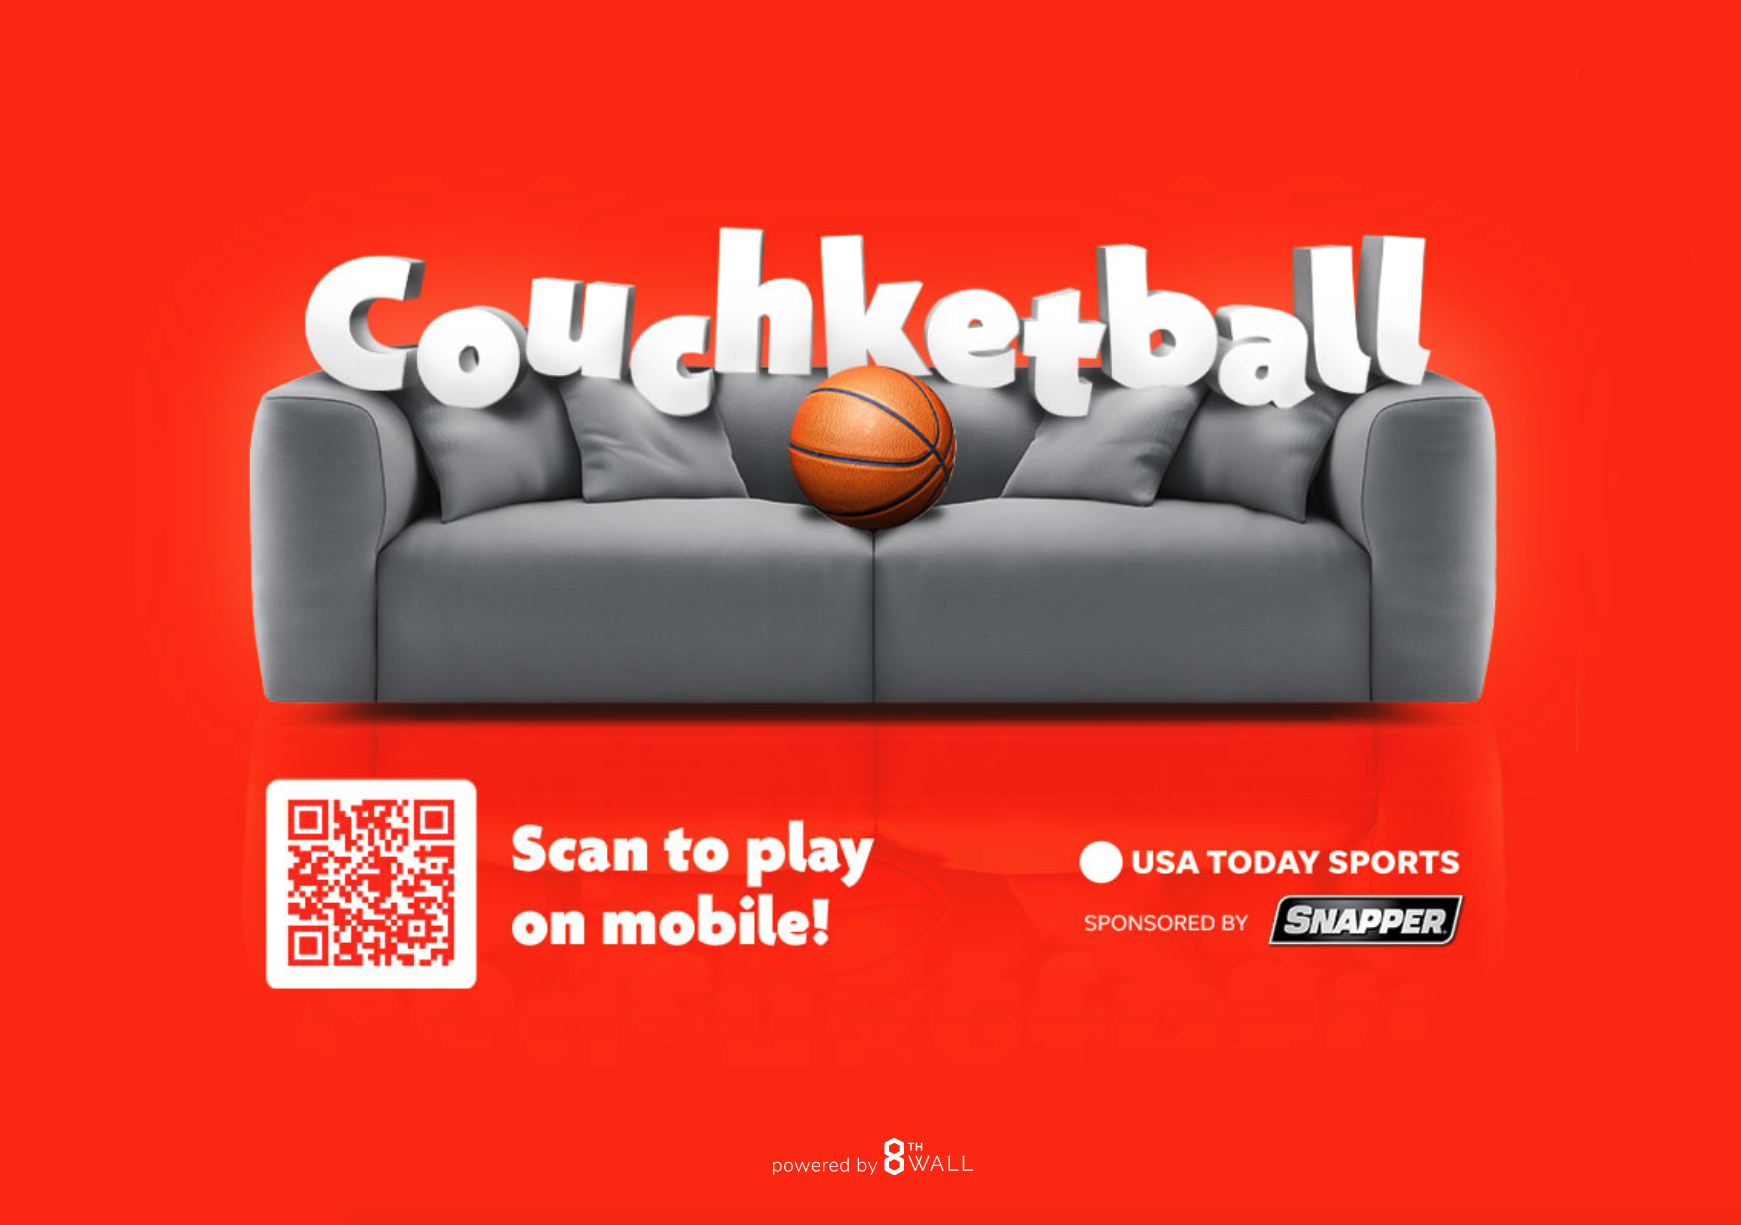 USA TODAY launches WebAR Hoops experience as part of its annual Brackets competition